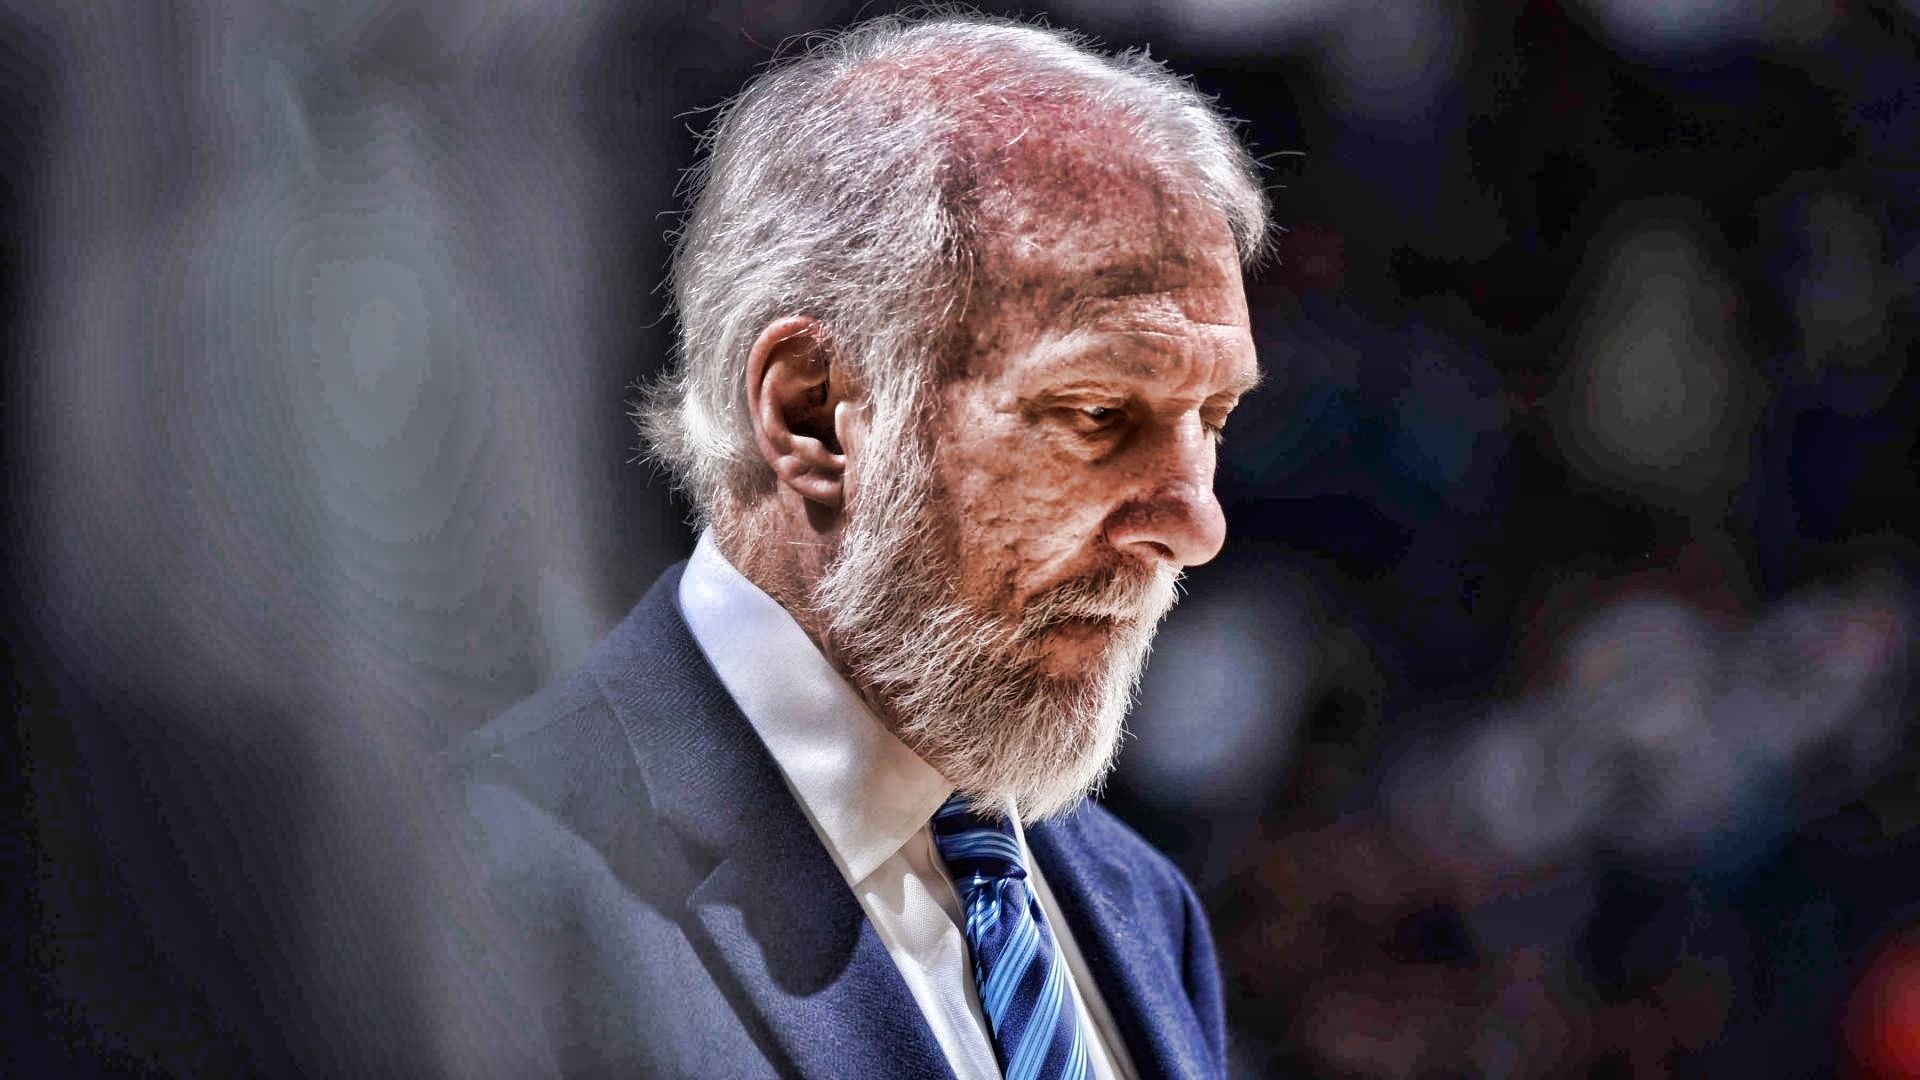 NBA Weekly Wrap: Popovich may be pondering retirement, Kyrie and his leadership mishaps, and the latest updates on LeBron’s recovery